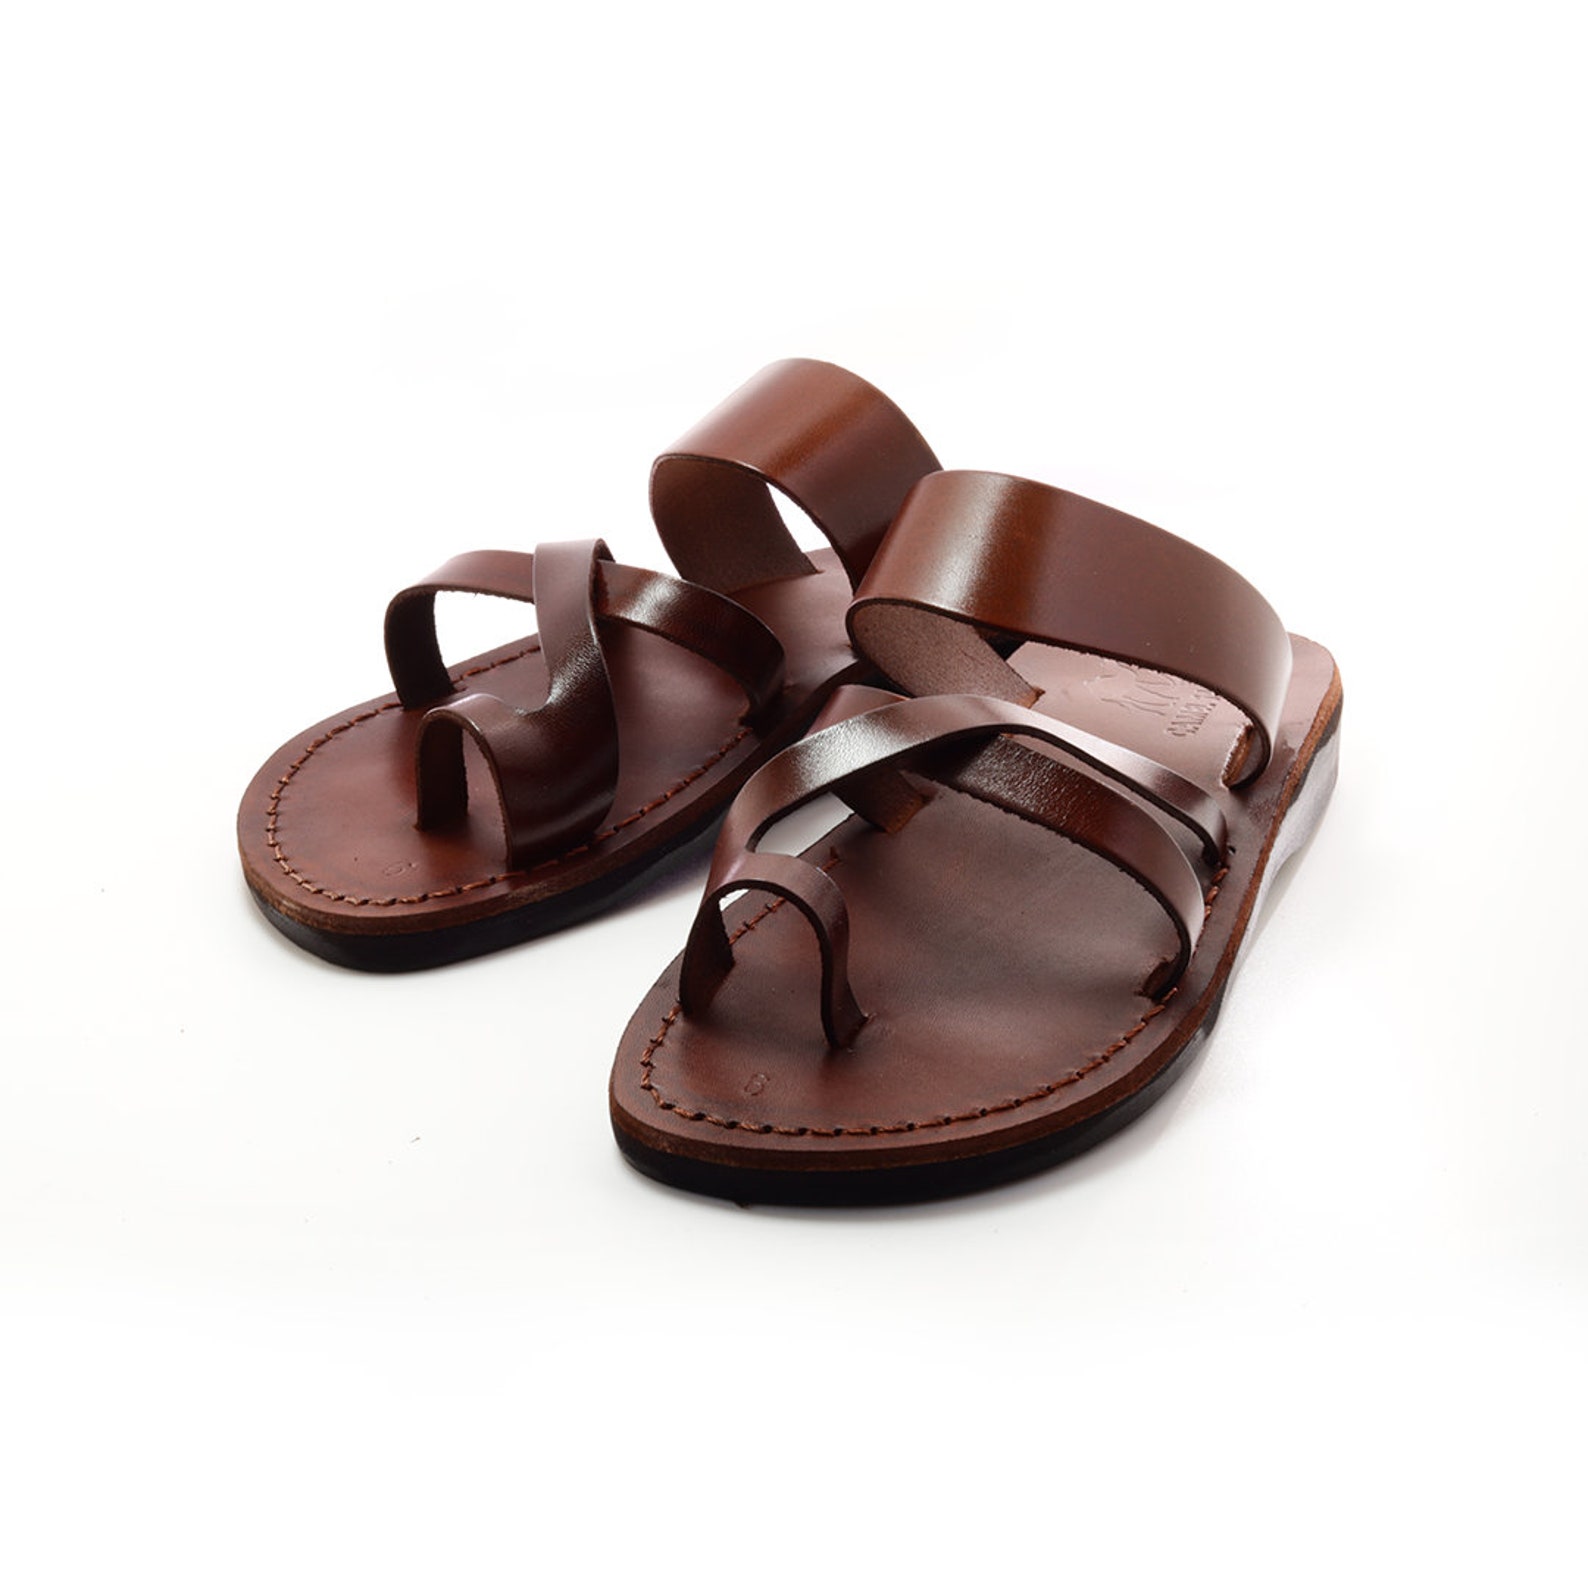 Toe Ring Slides Brown Leather Sandals for Men FREE SHIPPING - Etsy UK